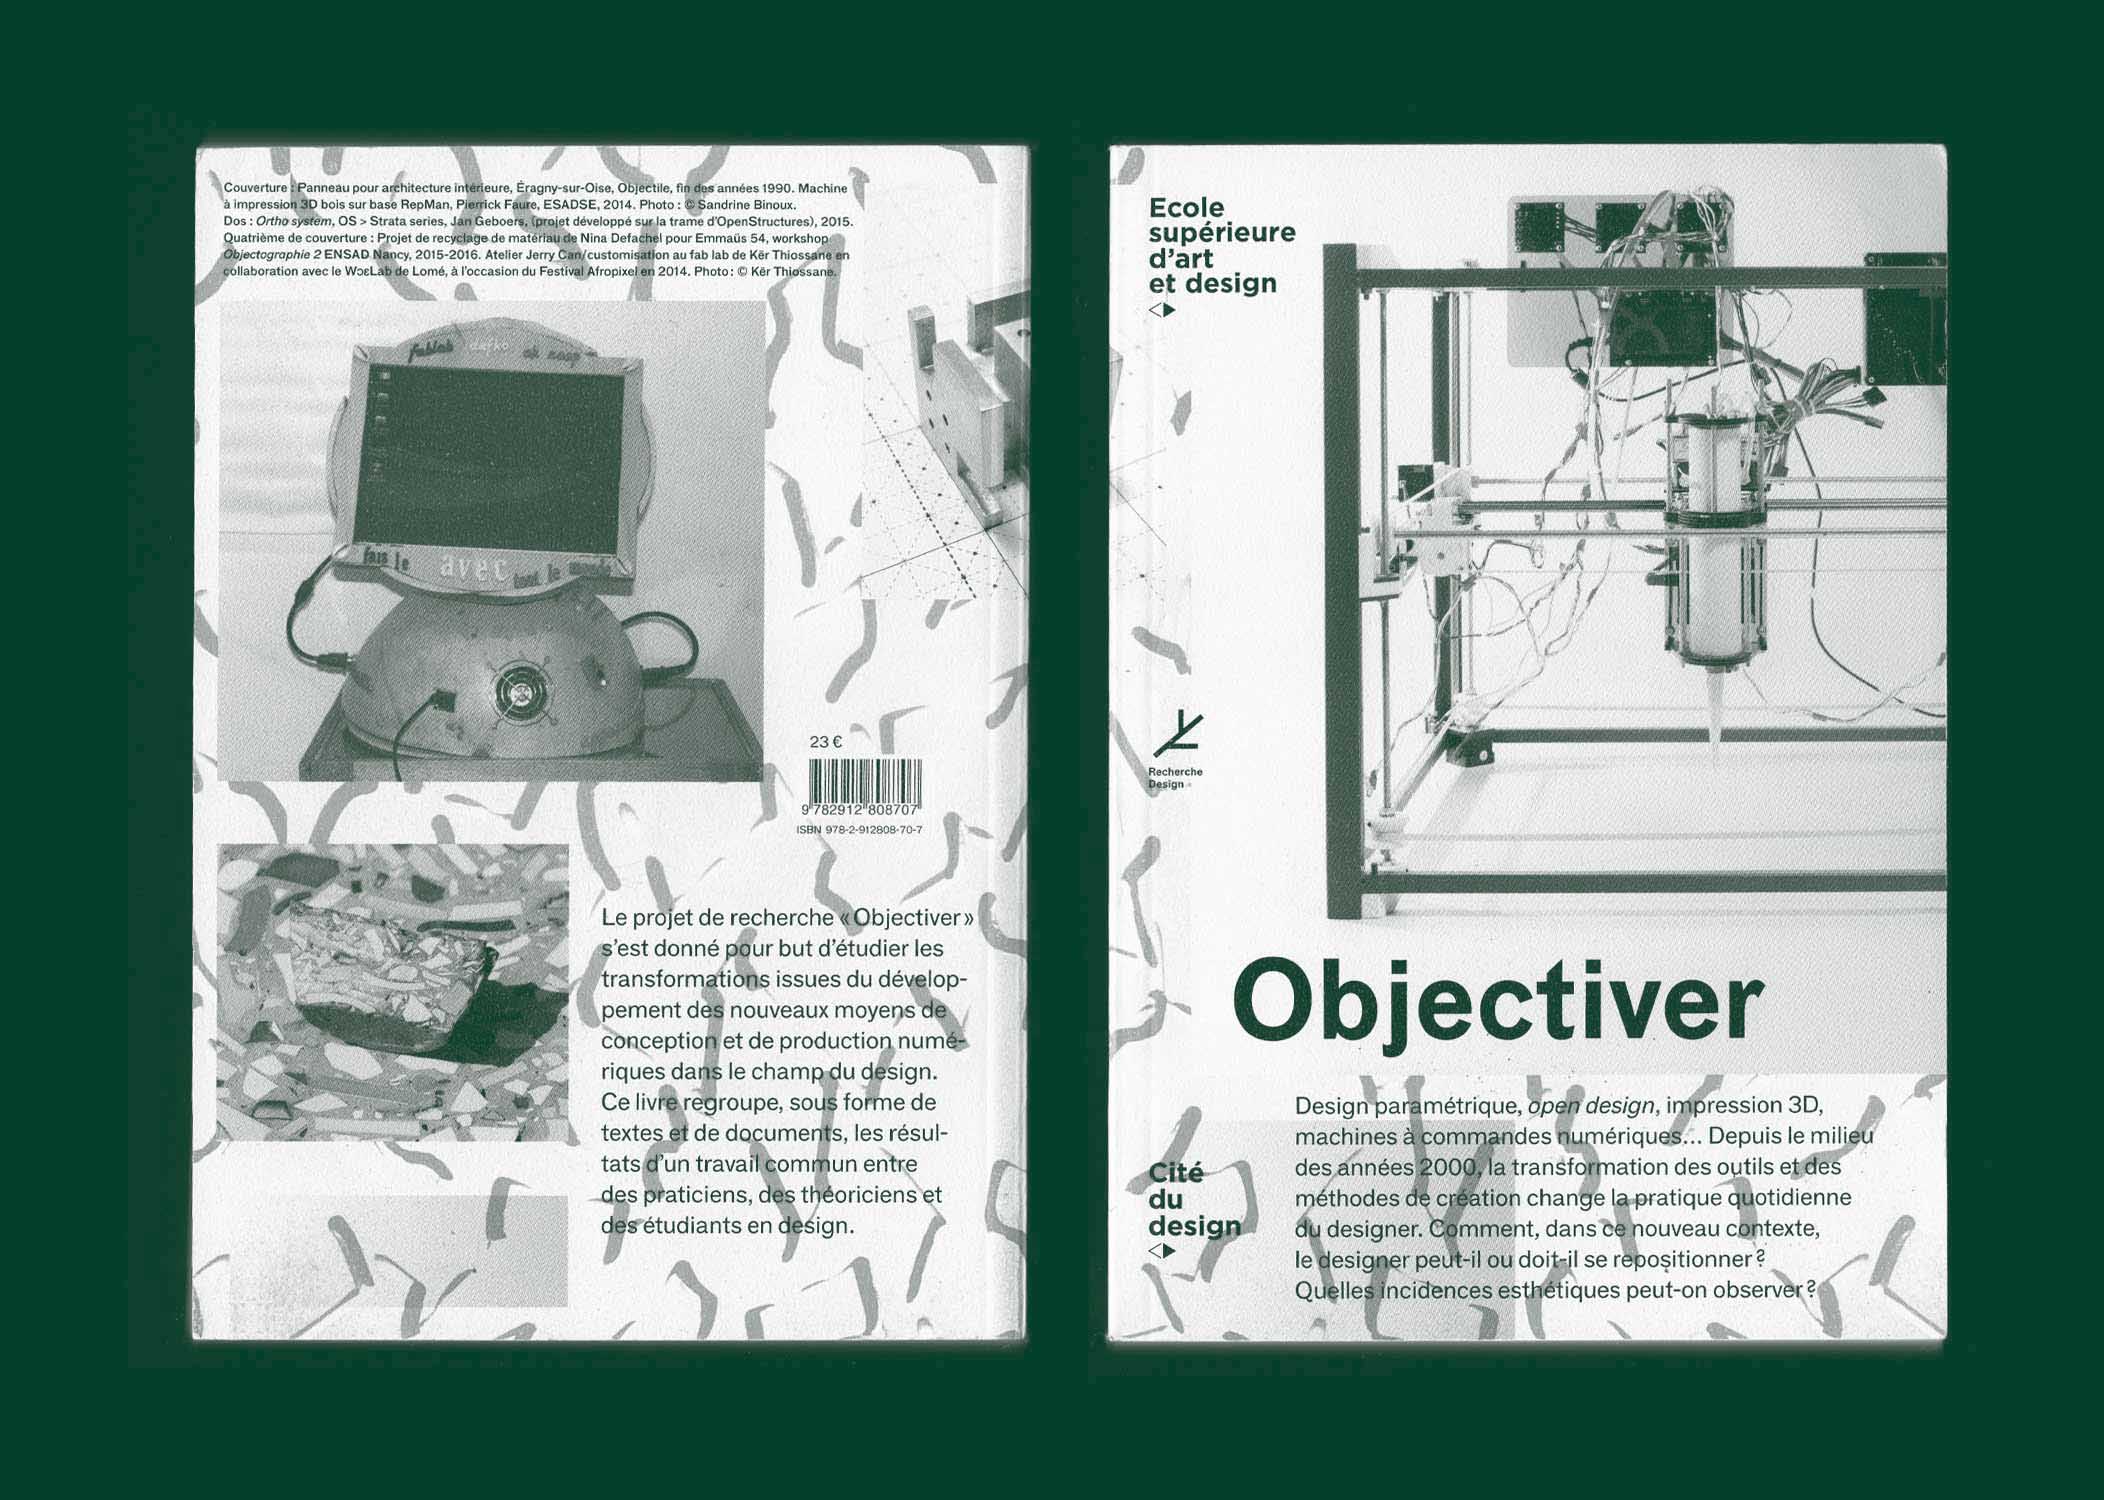 Objectiver